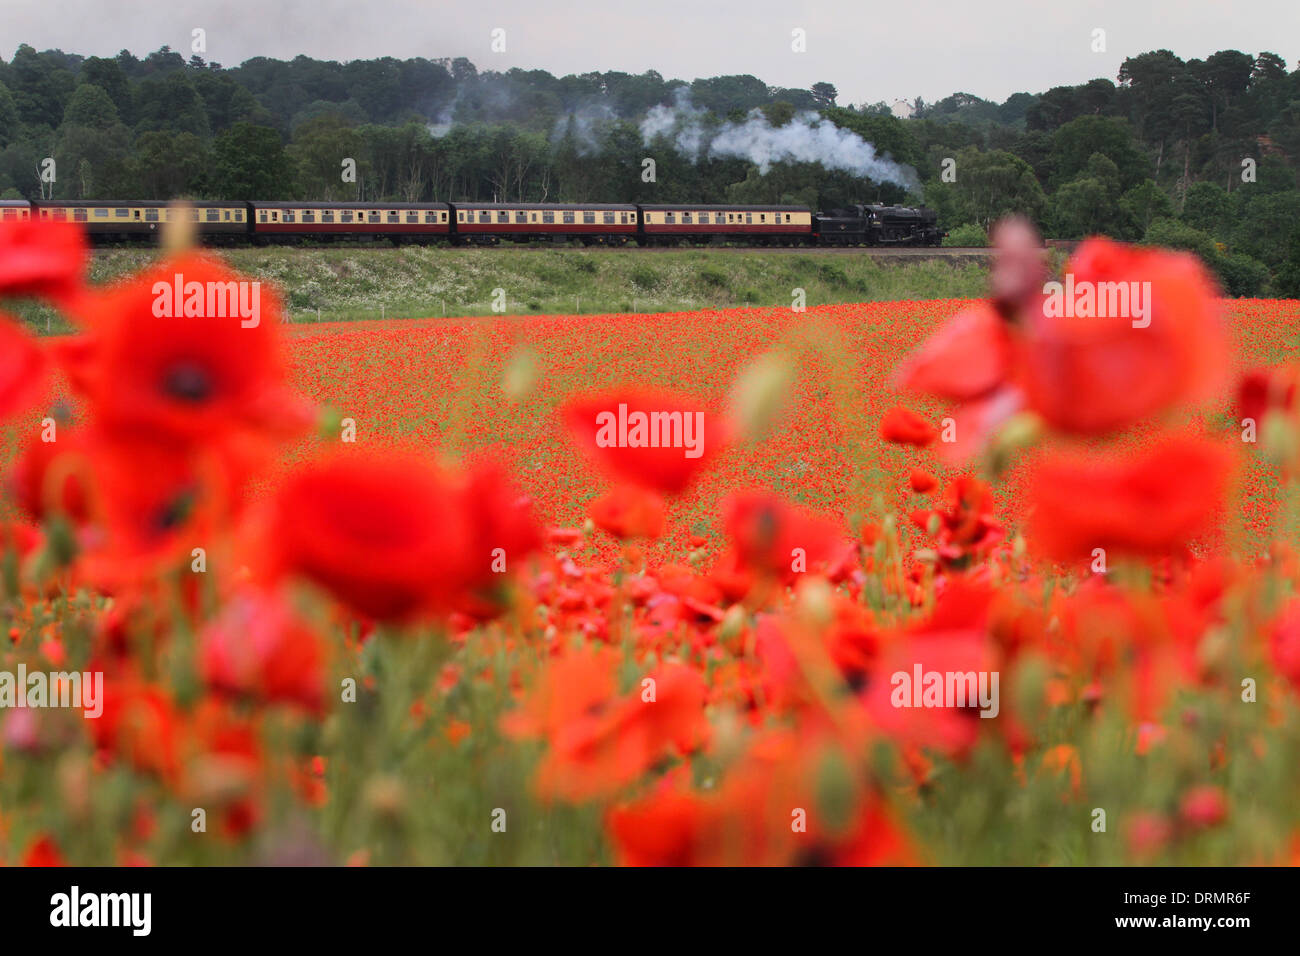 The Severn Valley Railway runs along the edge of the bright red fields of Poppies near Bewdley, Worcestershire Stock Photo